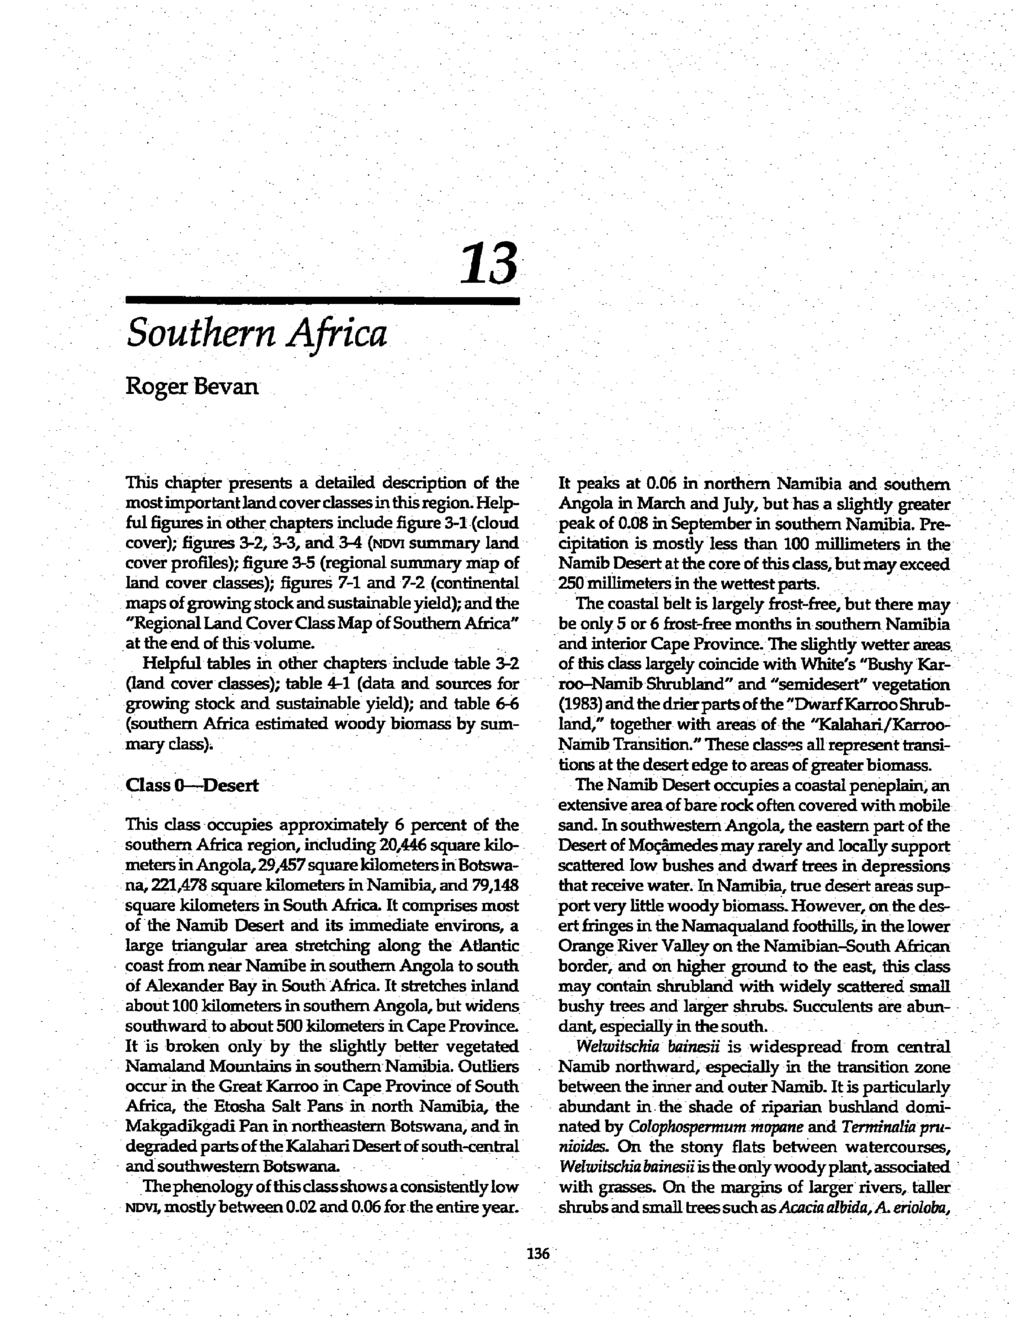 Southern Africa Roger Bevan 13 This chapter presents a detailed description of the It peaks at 0.06 in northern Namibia and souther mostimportantlandcoverclasses ithisregion.